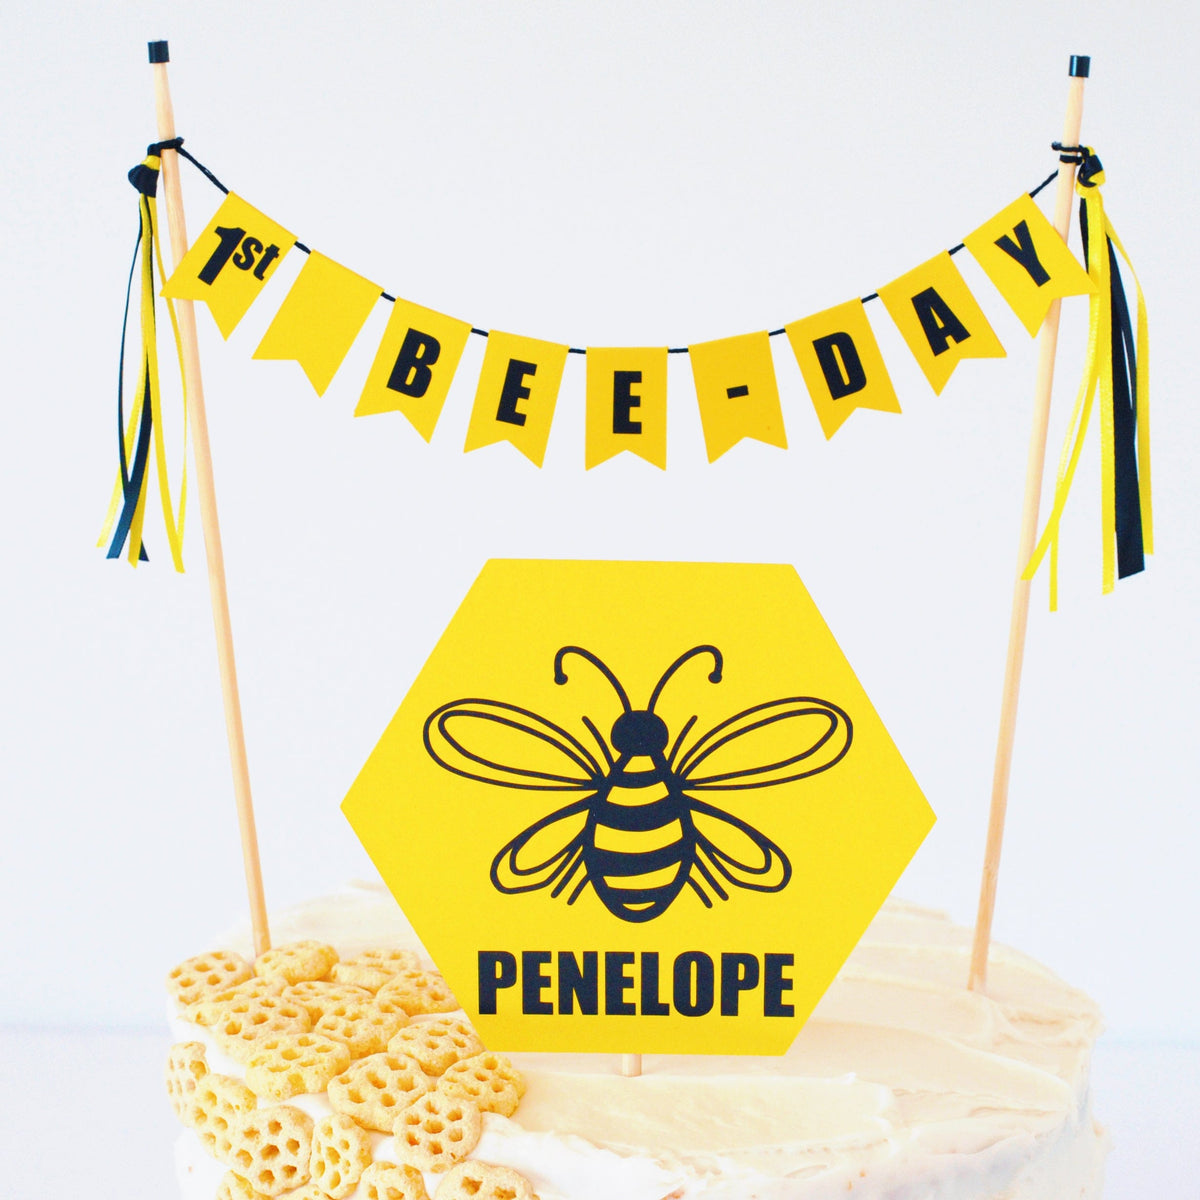 Happy 1st Bee Day Birthday Cake Topper - Wild One Gold Glitter Cake Décor -  Spring Holidays Bumble Honey Bee Honeycomb Baby's First Barthday Party